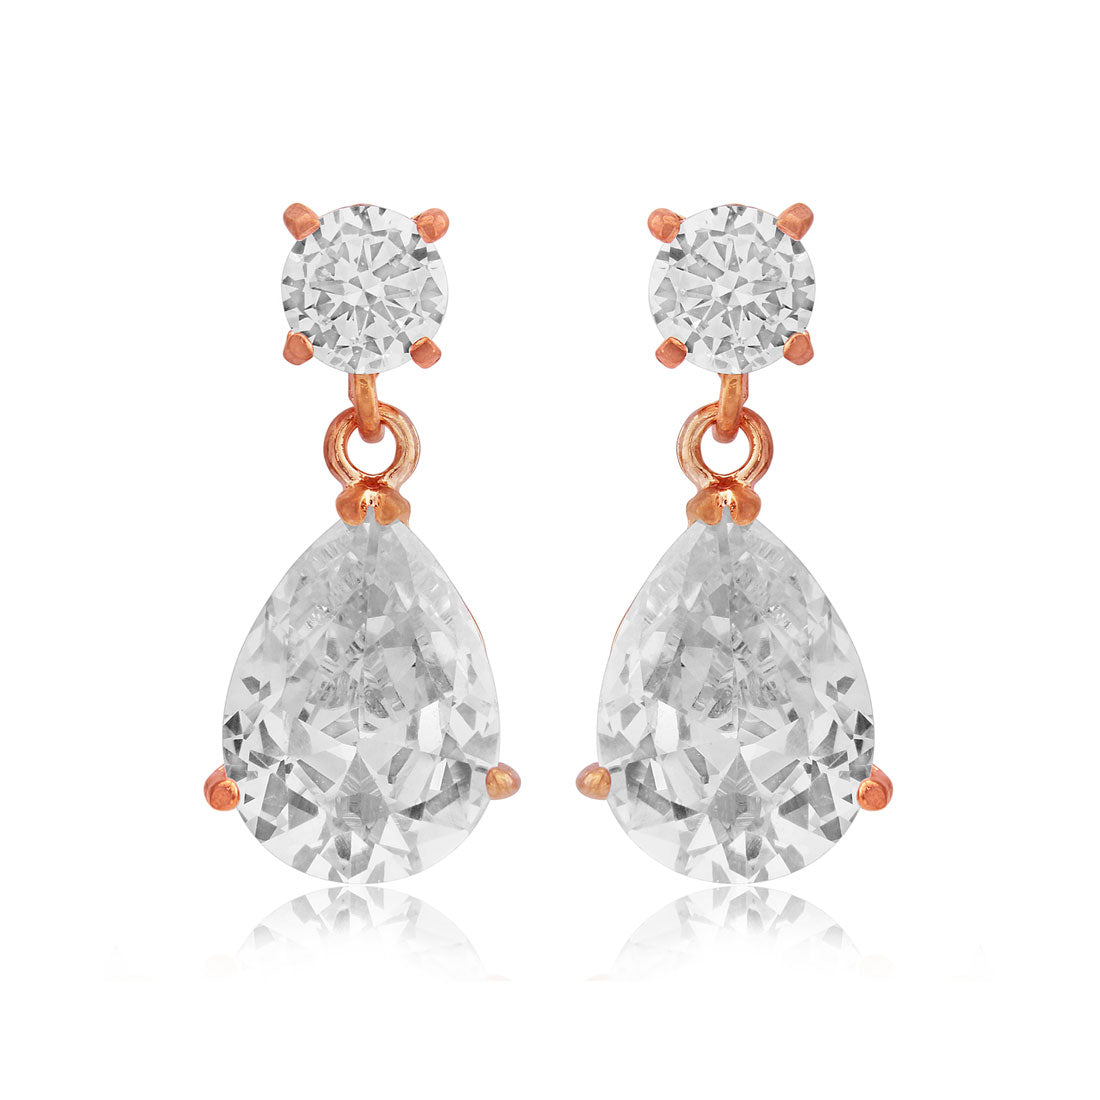 Romantic Starlet Rose Gold Cubic Zirconia Teadrop Earrings for Weddings & Occasions